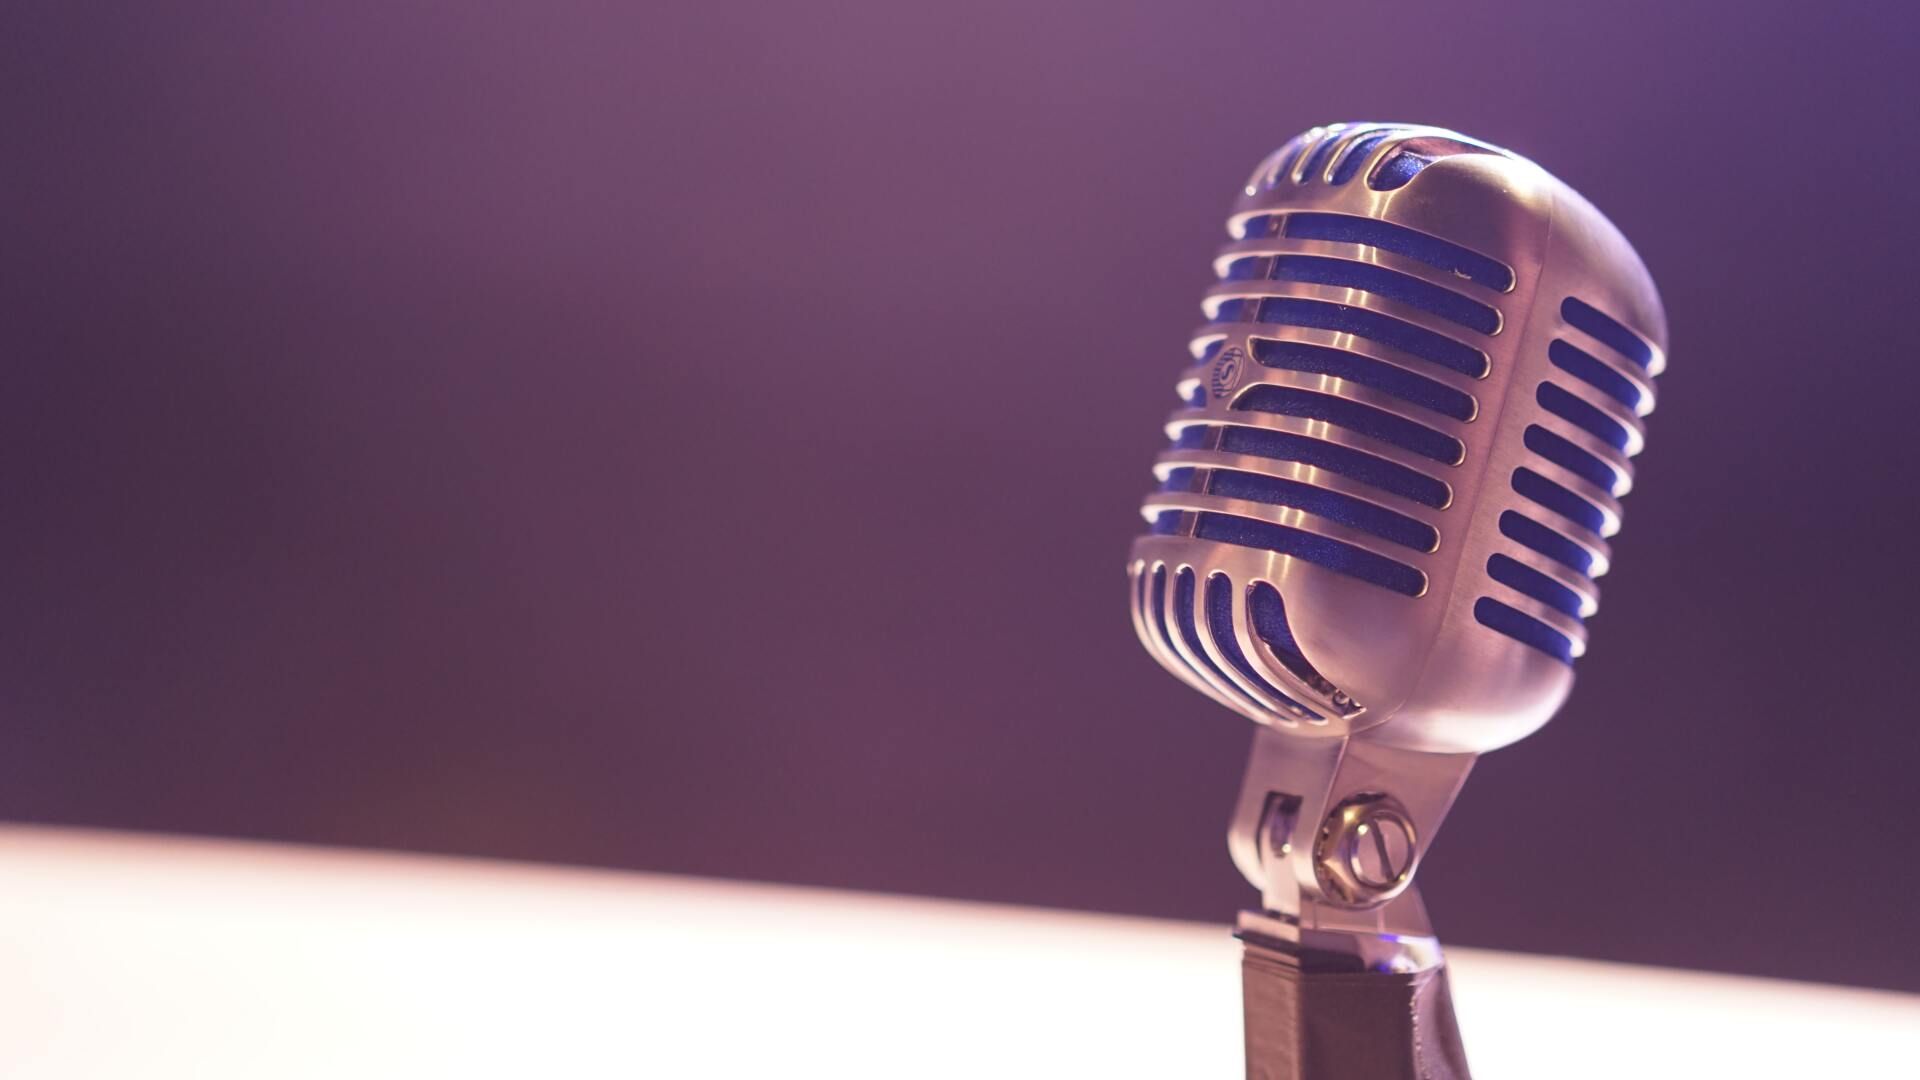 A microphone is sitting on a table in front of a purple background.